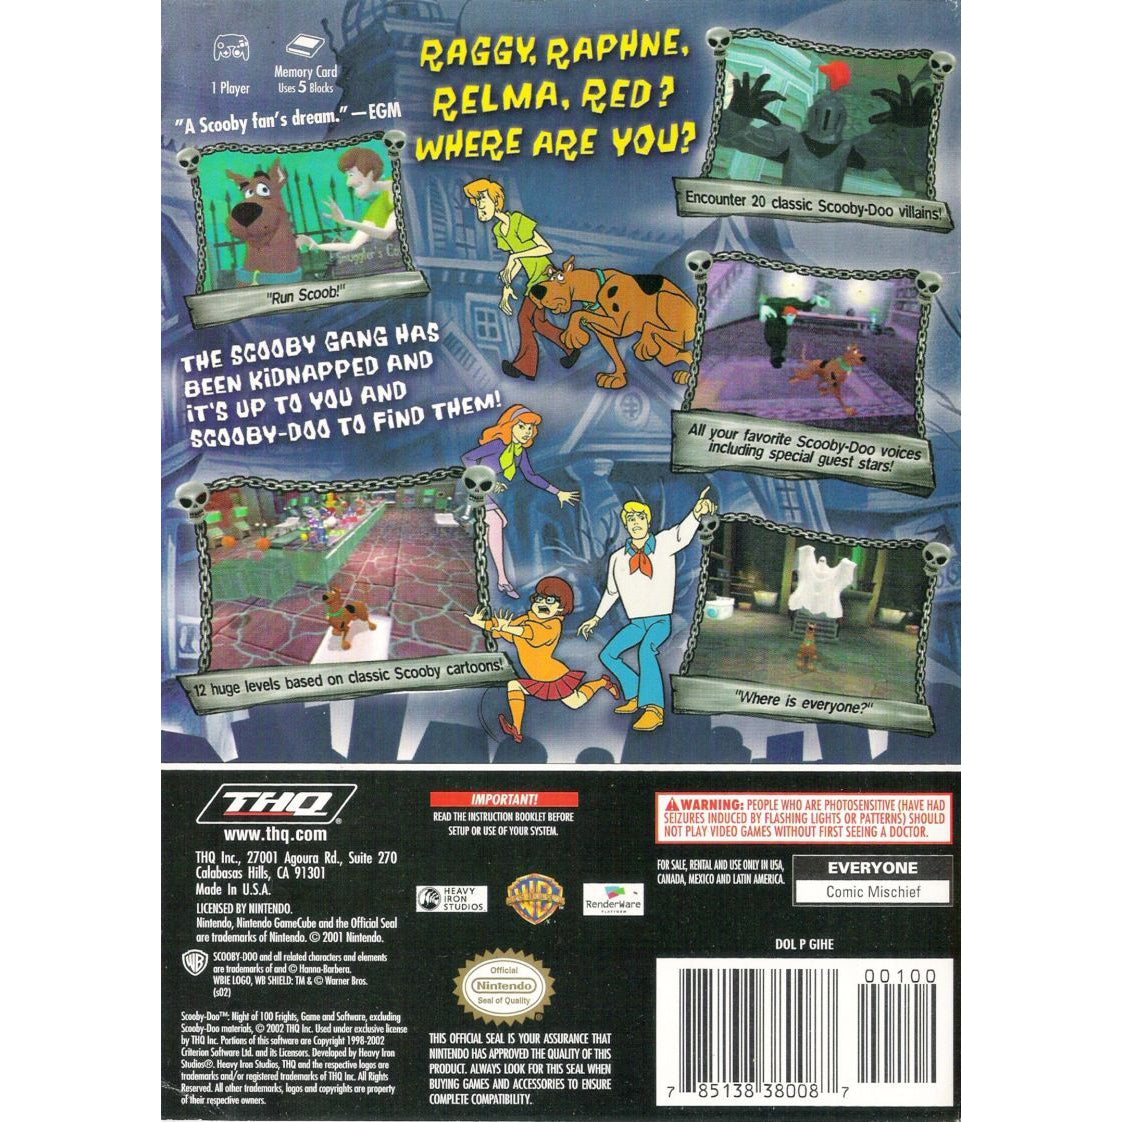 Scooby-Doo!: Night of 100 Frights - GameCube Game - YourGamingShop.com - Buy, Sell, Trade Video Games Online. 120 Day Warranty. Satisfaction Guaranteed.